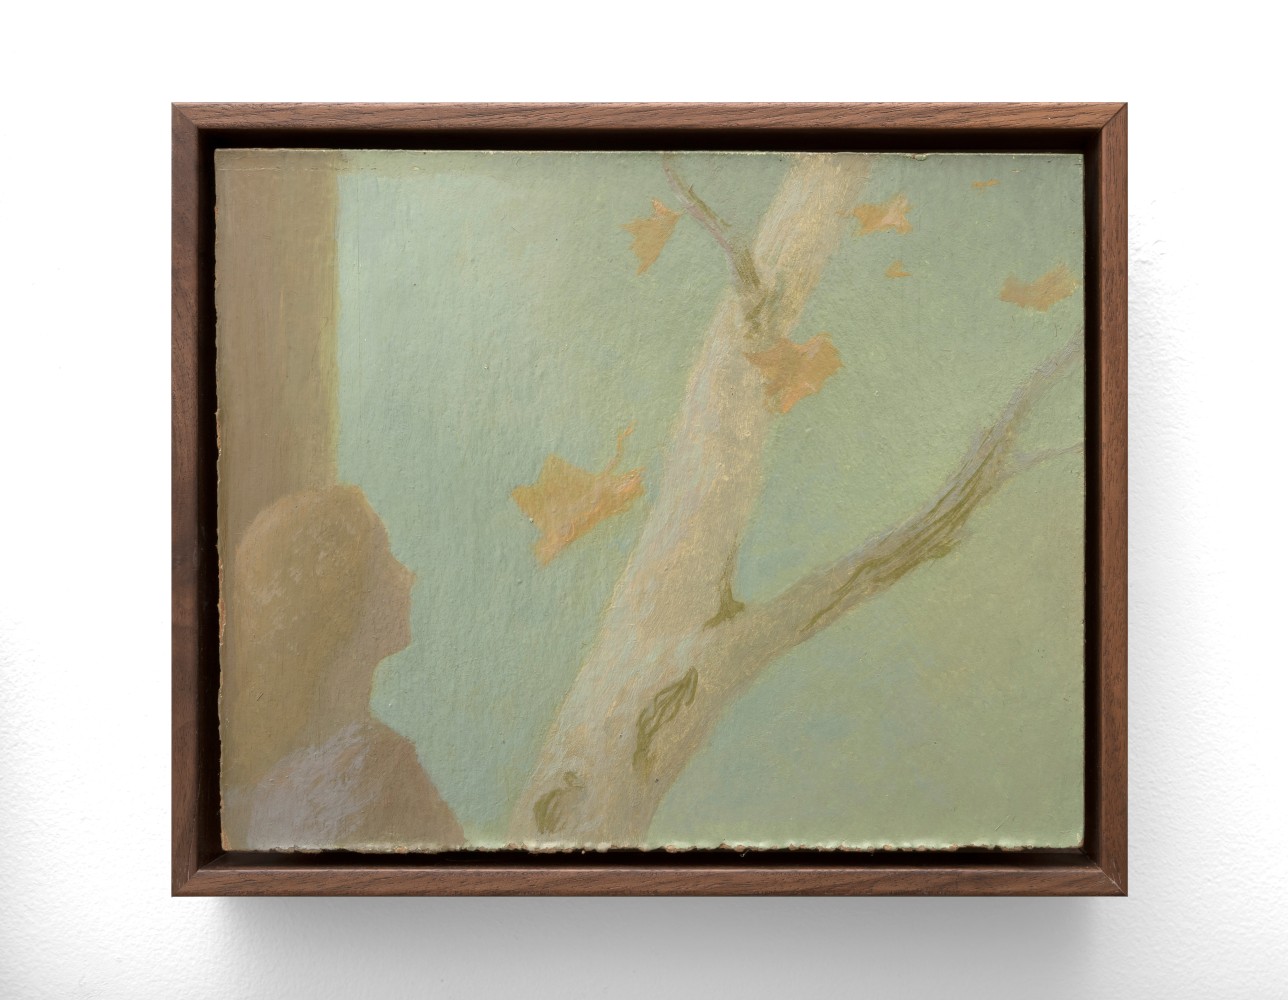 Falling Leaves, 1950  oil on carton 8 x 10 inches;  20.3 x 25.4 centimeters LSFA# 15273